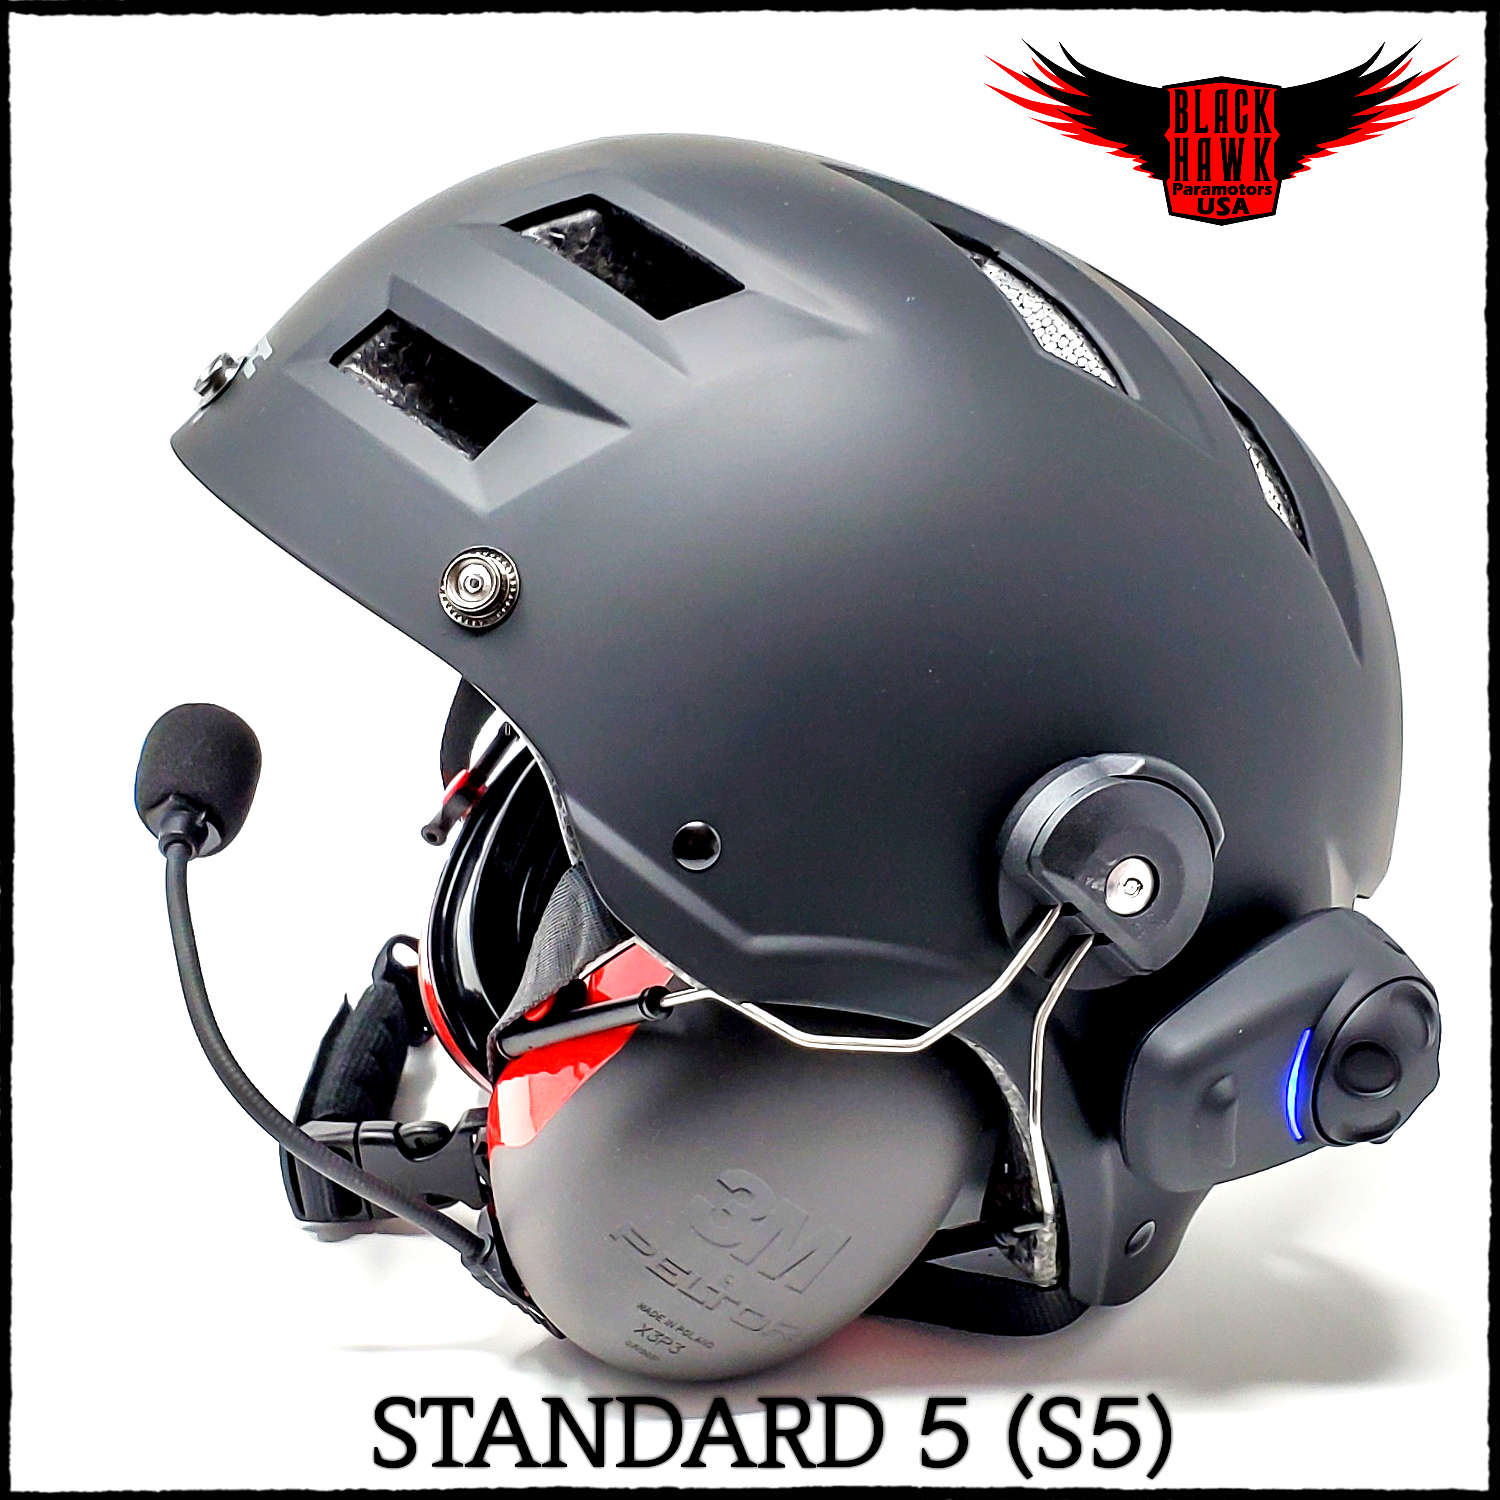 Paramotor Helmet PPG with Bluetooth Sena communication Equipped 